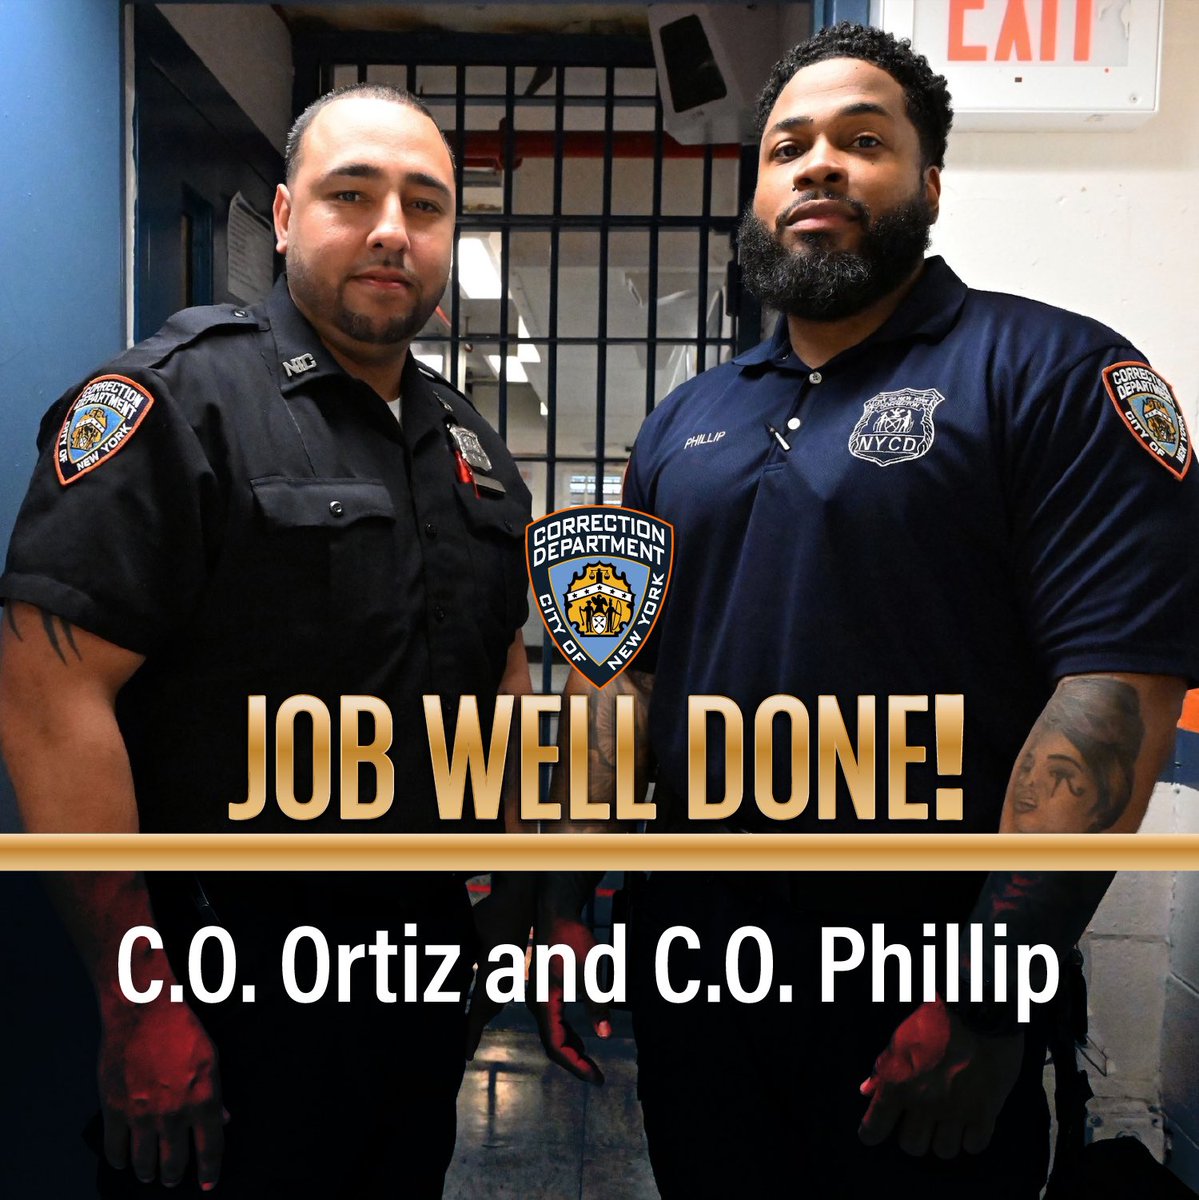 Today, a job well done goes to #DOC Officers Ortiz and Phillip for catching a person in custody on #RikersIsland attempting to smuggle in drugs. Learn more today at bit.ly/3KhWq0Y. #JoinTheBoldest #FlashbackFriday